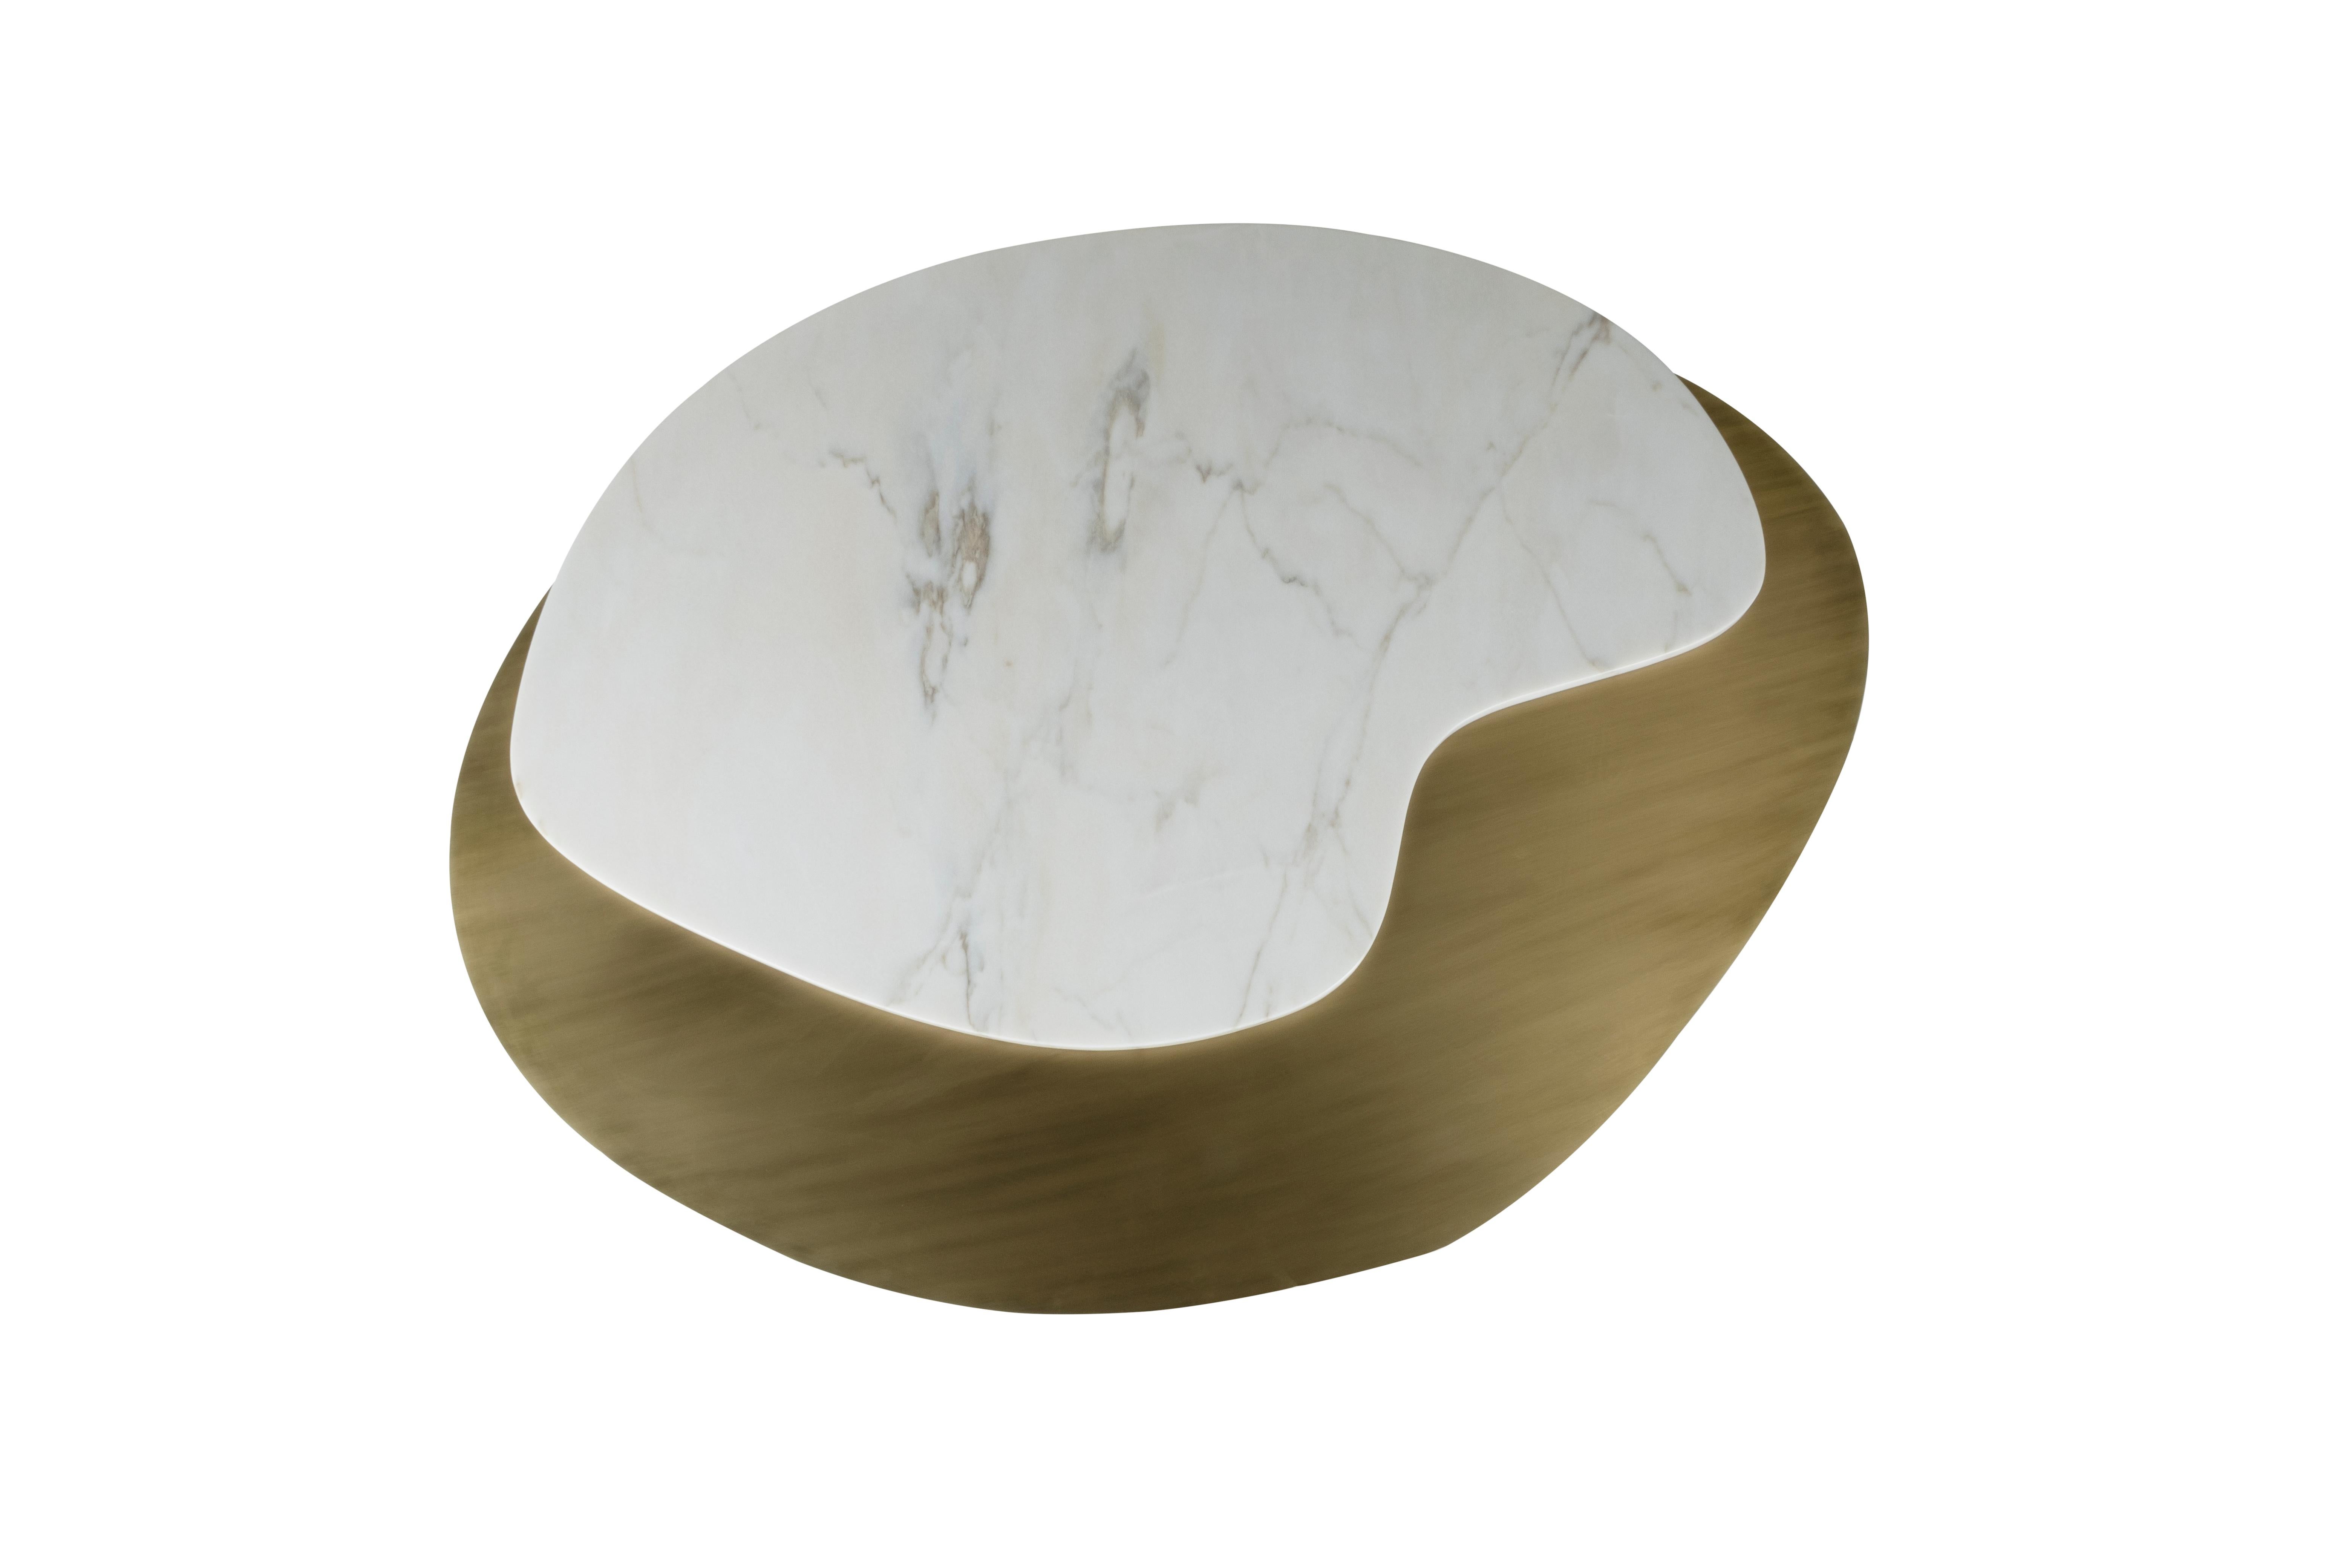 Landscape Coffee Table, Contemporary Collection, Handcrafted in Portugal - Europe by Greenapple.

Designed by Rute Martins for the Contemporary Collection and inspired by fluid lines like in nature, this low table adds a representation of our